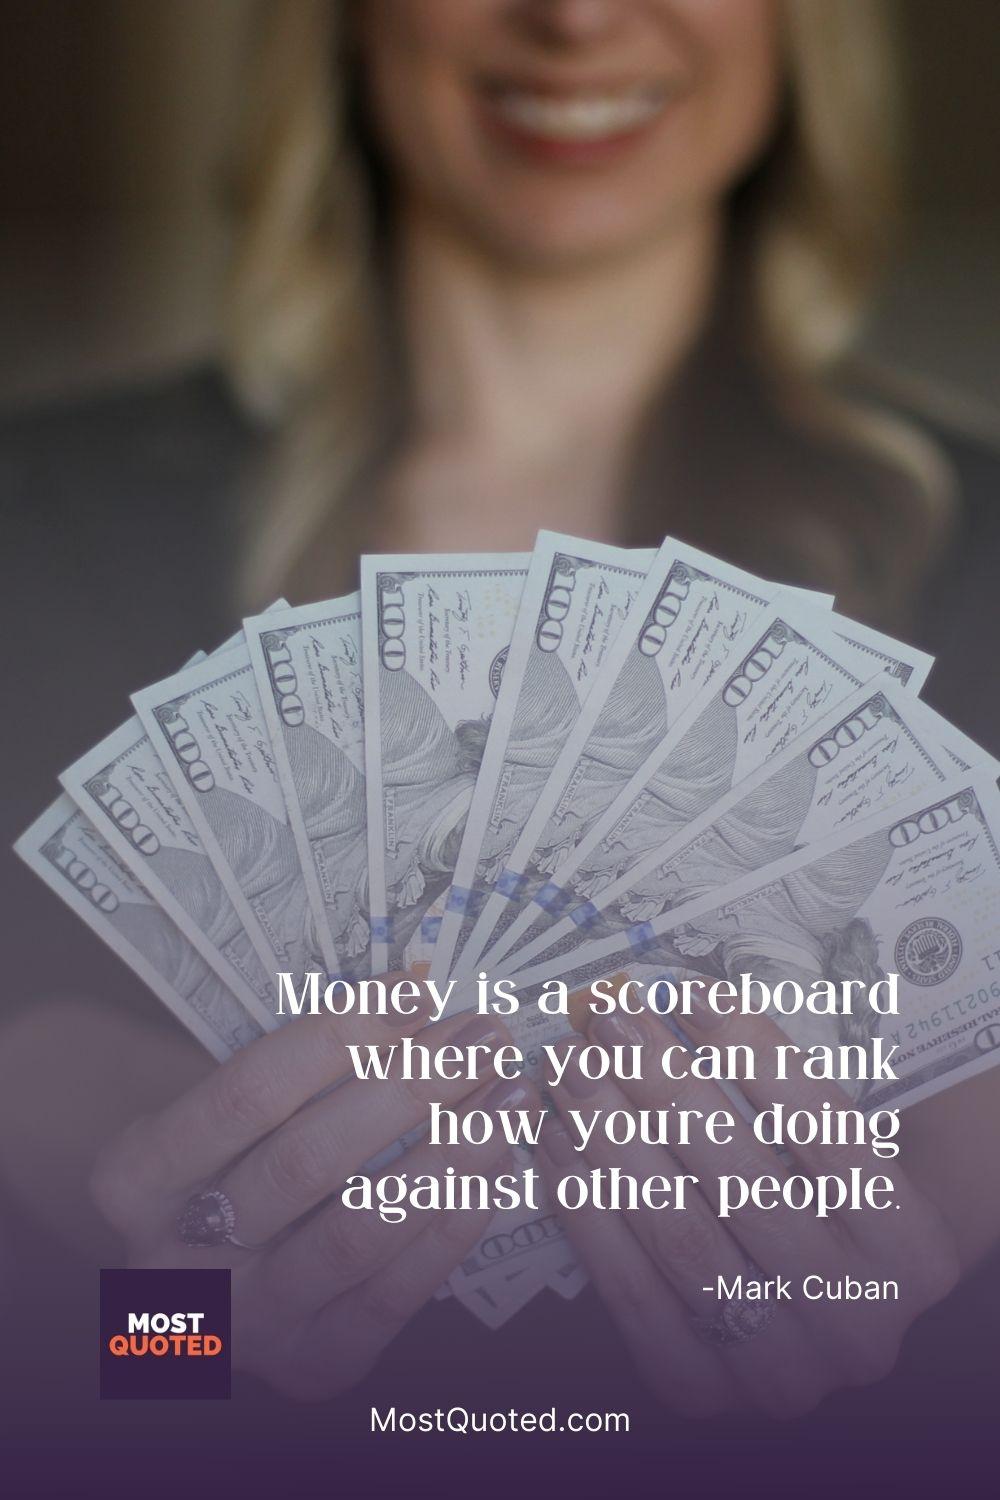 Money is a scoreboard where you can rank how you’re doing against other people. - Mark Cuban